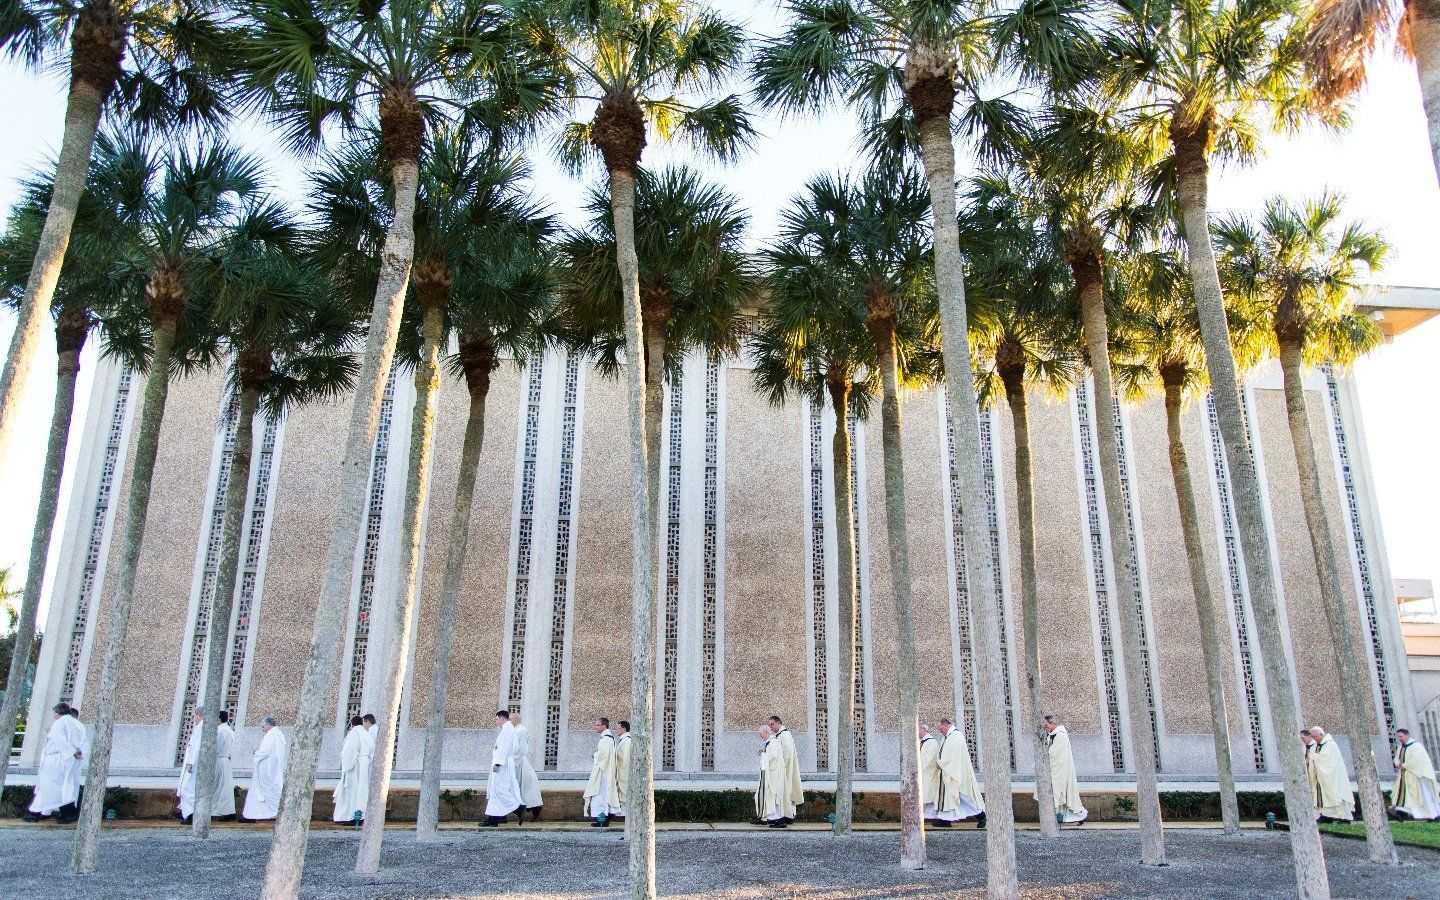 Priests walking in front of chapel and palm trees